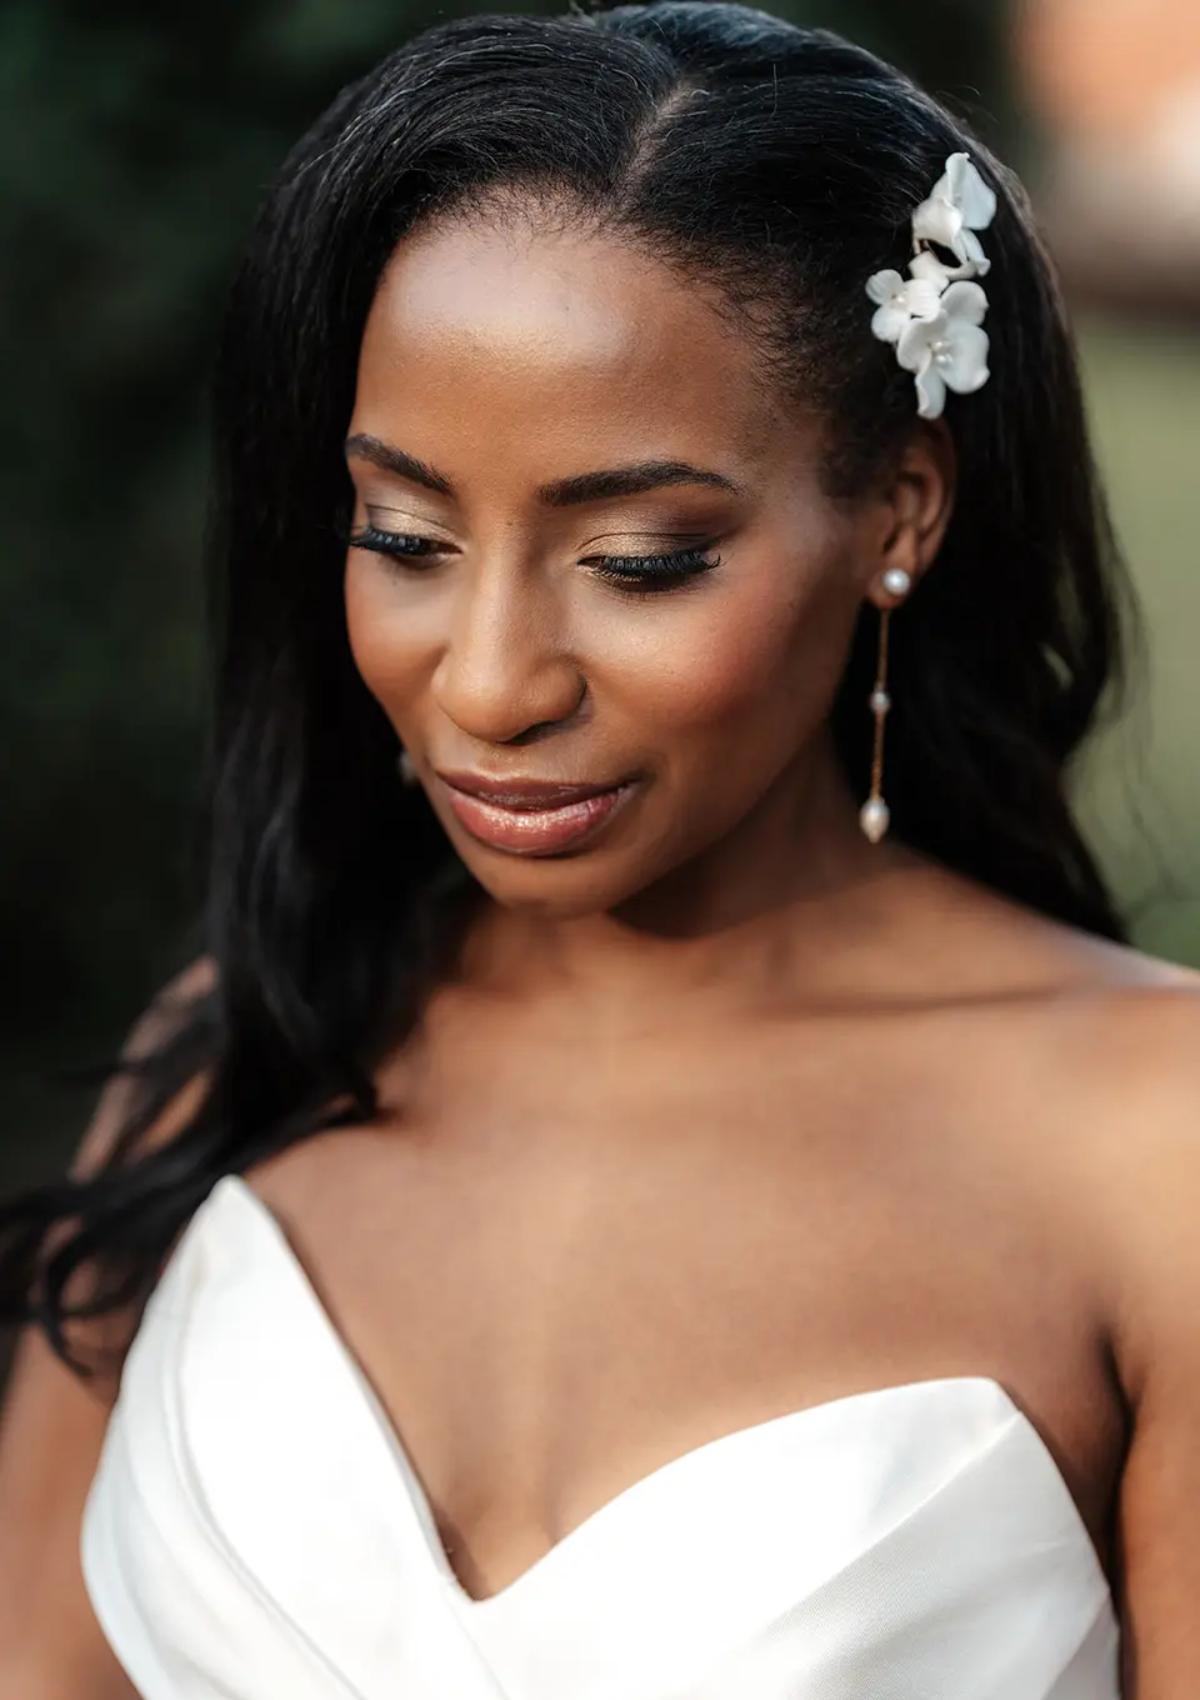 11 beautiful wedding hairstyles down for brides and bridesmaids